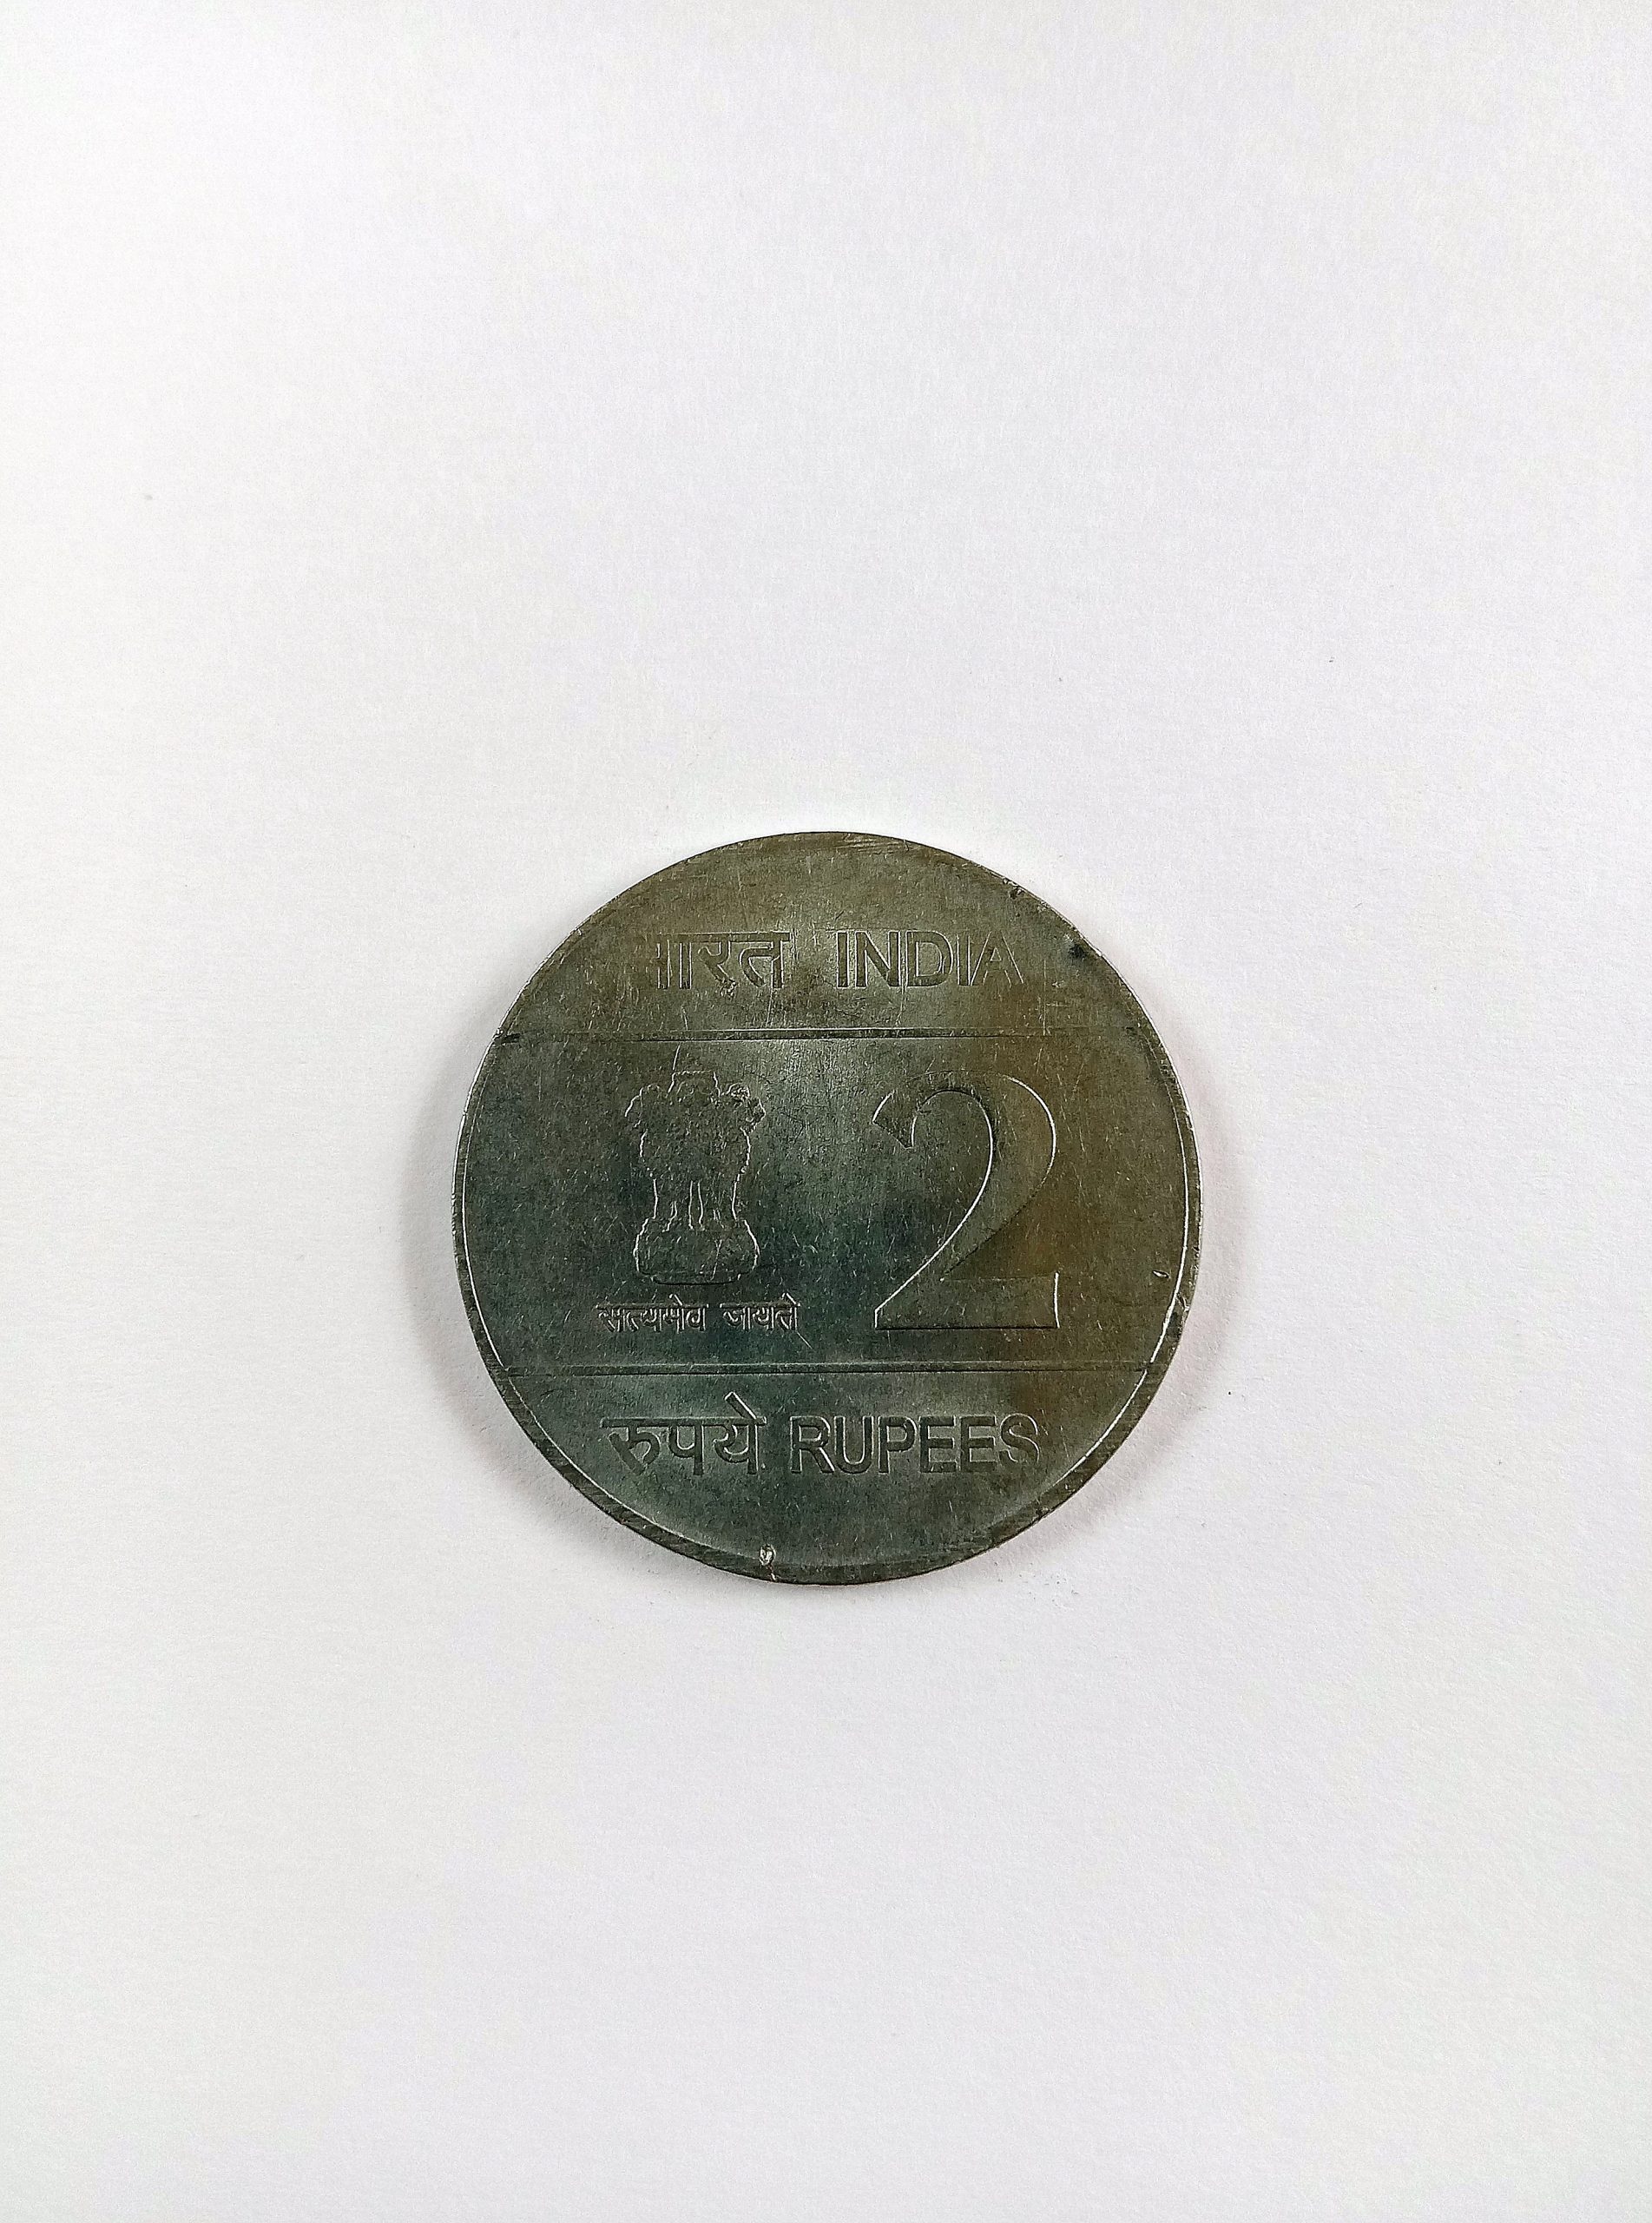 A two rupee coin